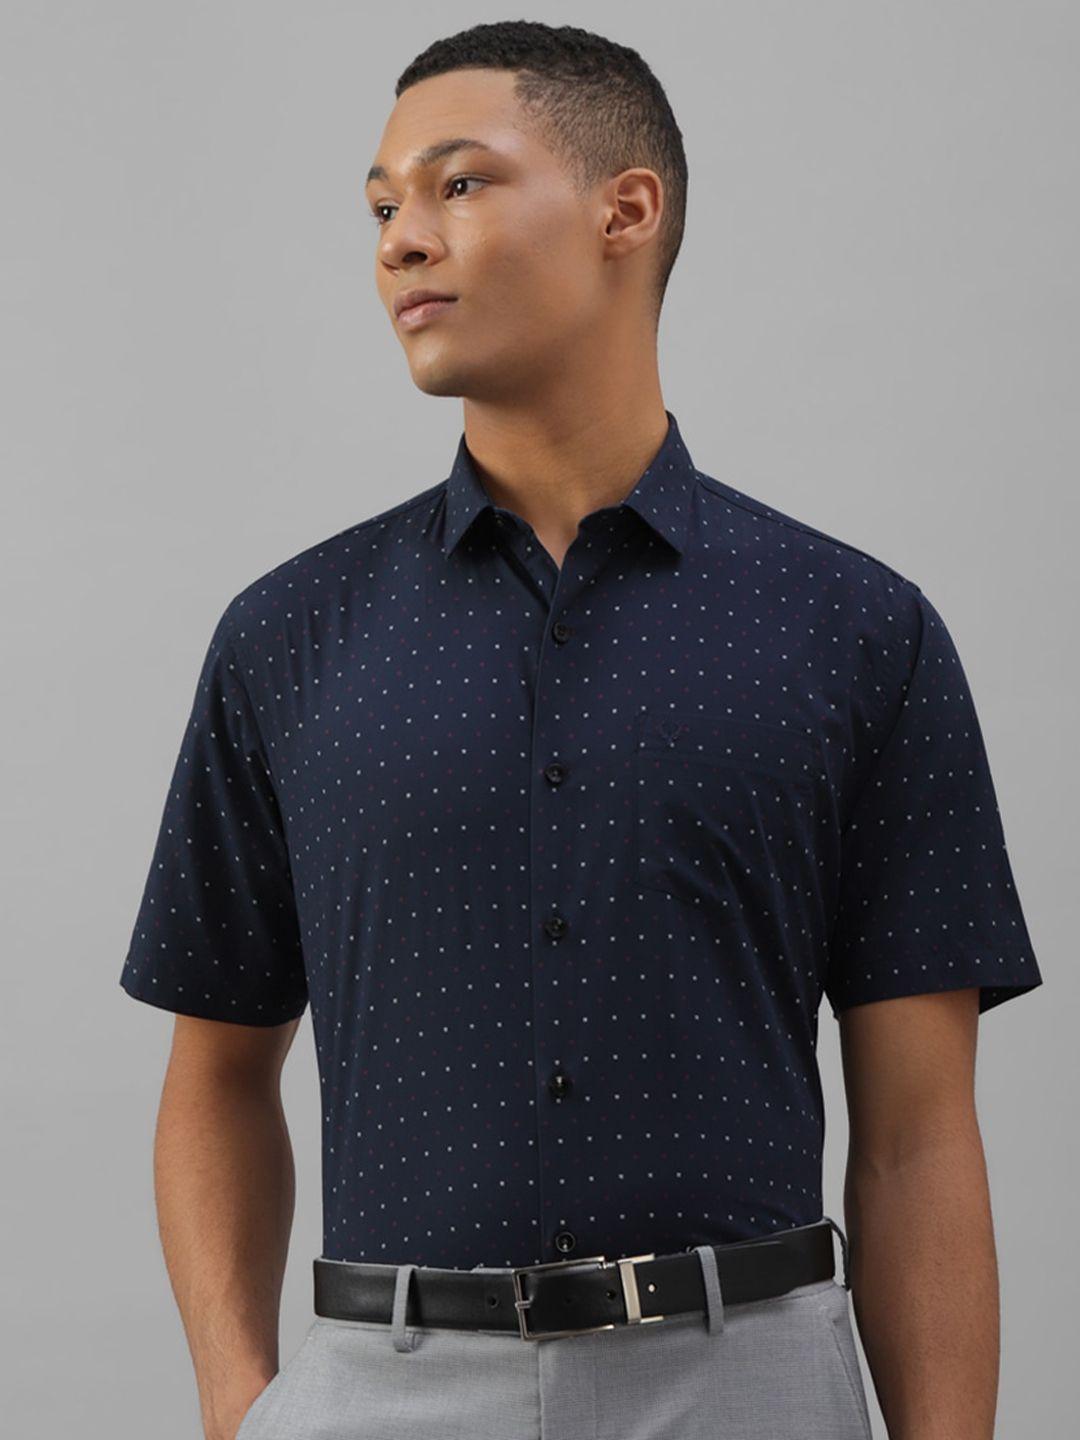 allen solly polka dots printed pure cotton formal shirt